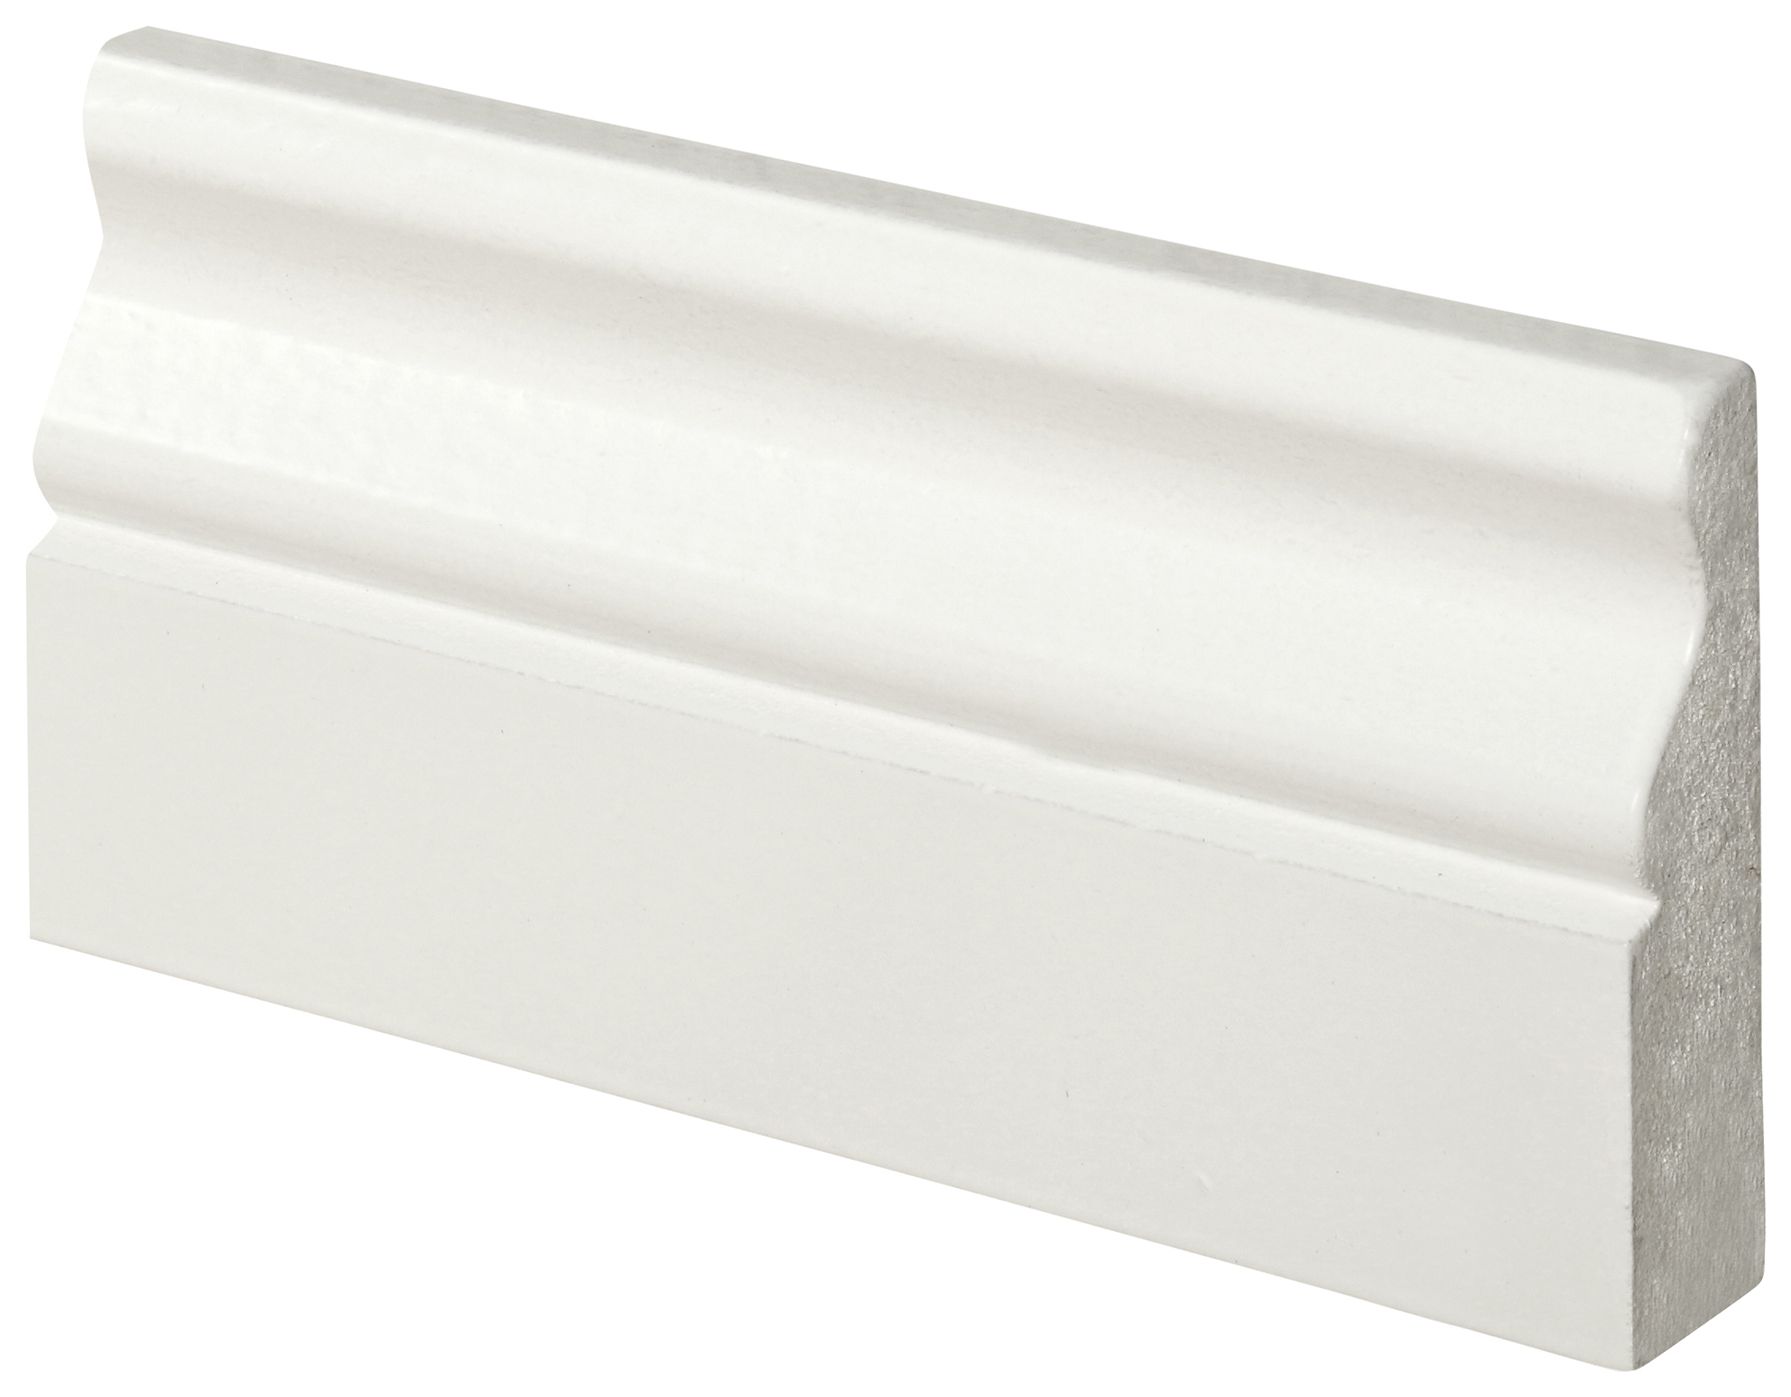 Image of Wickes Ogee Fully Finished Architrave - 18 x 69 x 2100mm